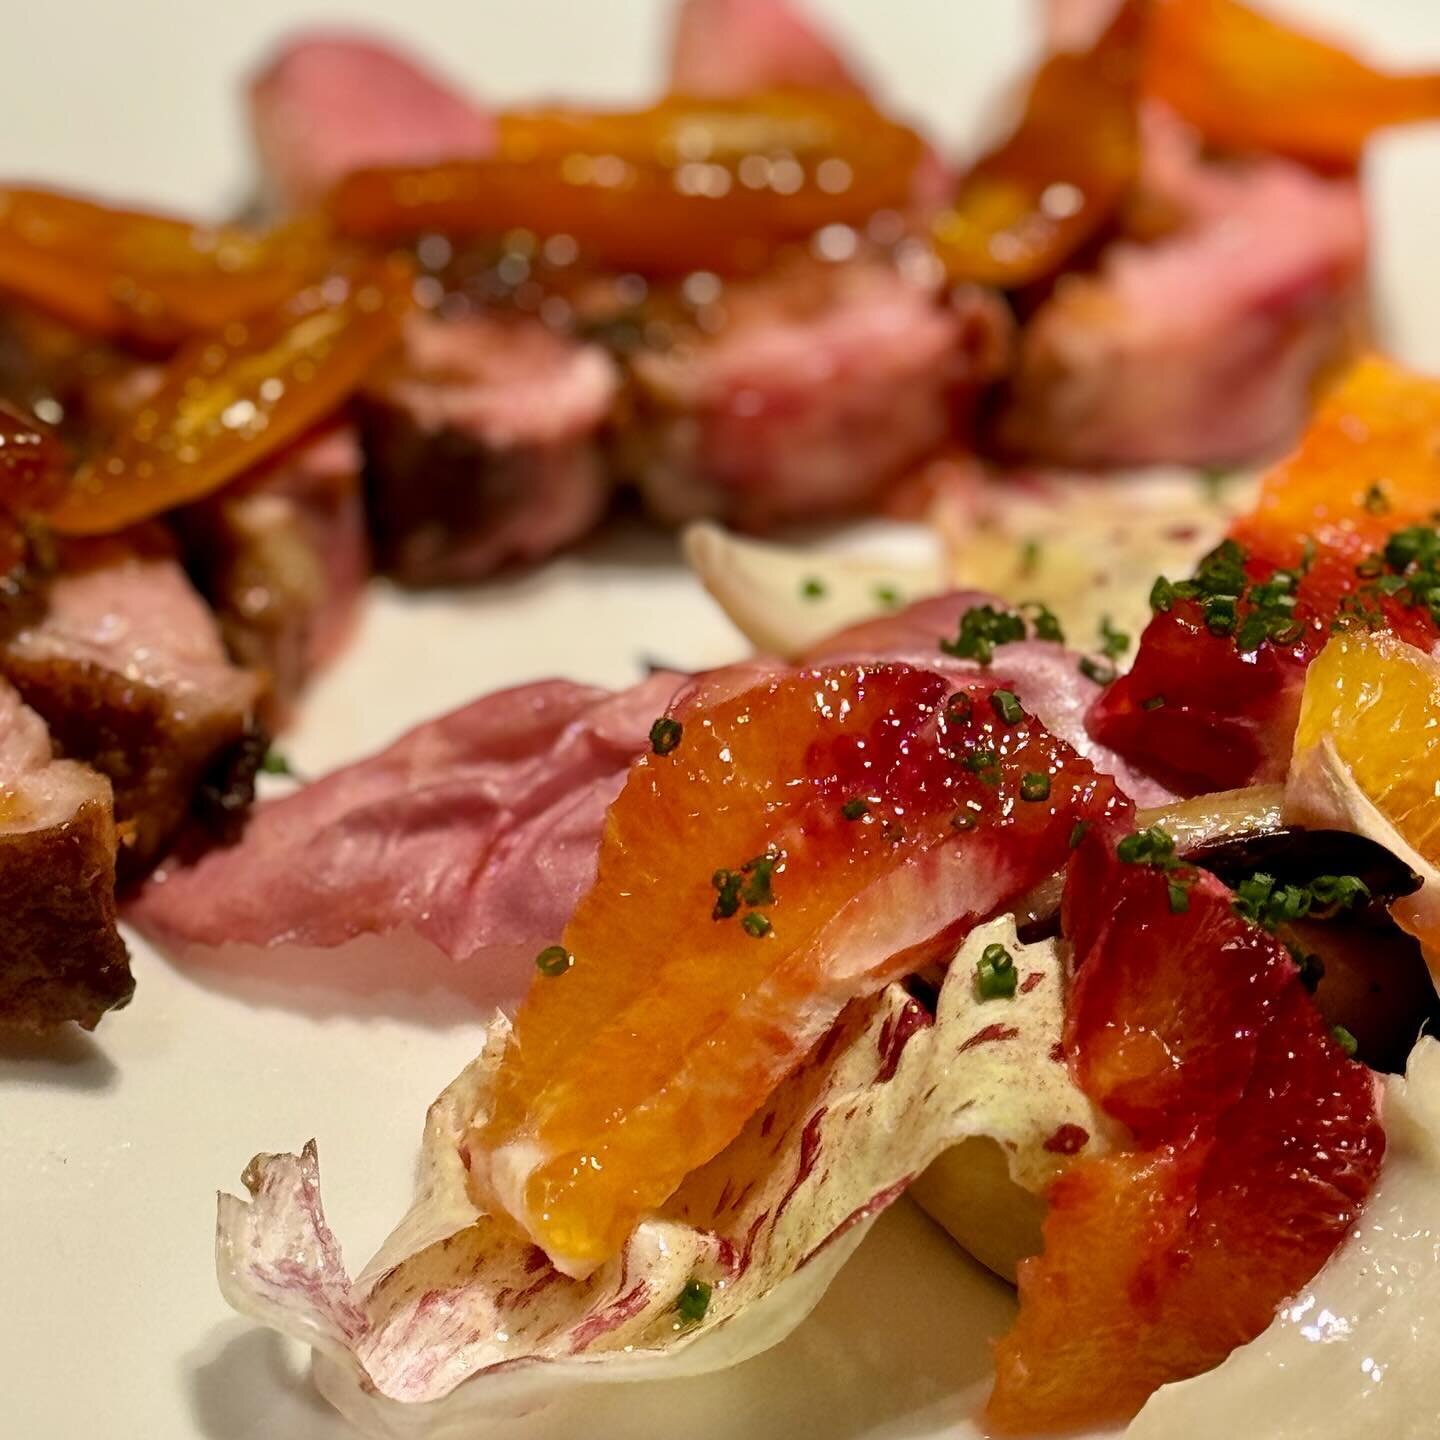 February in review.

1, Duck breast cooked sous vide, kumquat preserve and radicchio salad
2, Hazelnut babka made with homemade hazelnut chocolate praline
3-4, Cooking demonstration in Dublin
5, Awards ceremony for West London Business Awards
6, Back